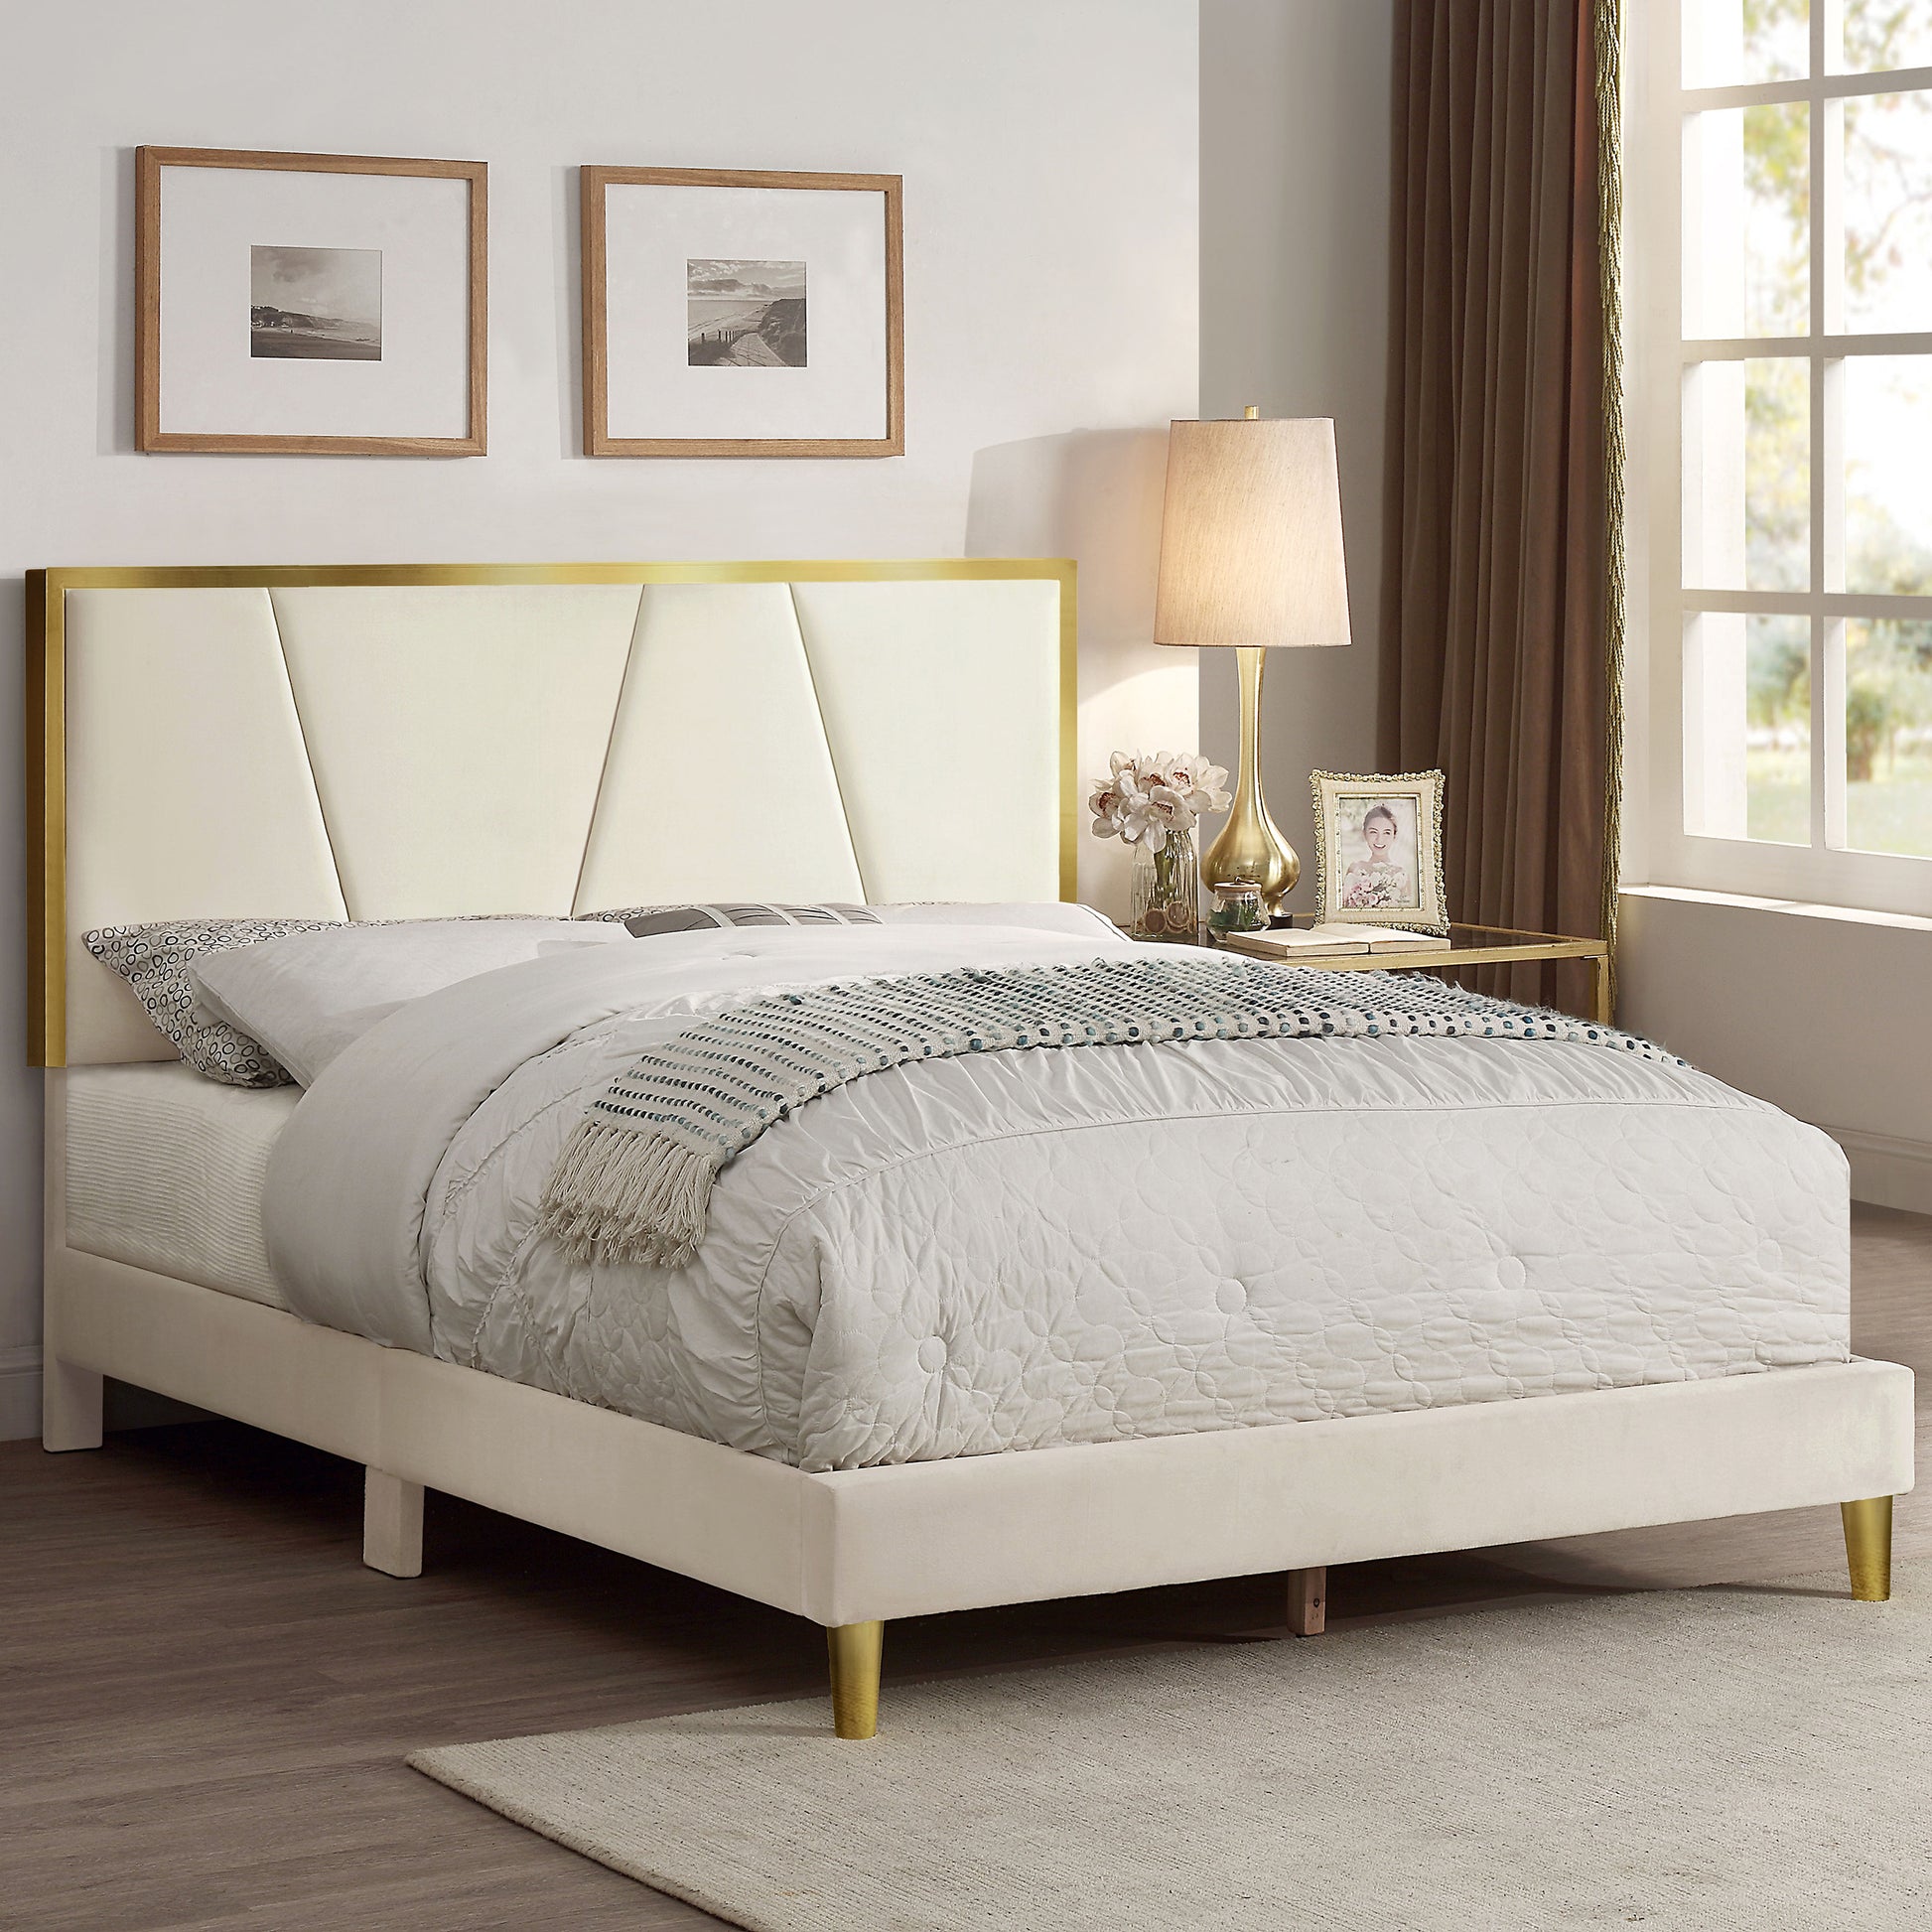 Right angled contemporary beige and gold upholstered full bed in a bedroom with accessories